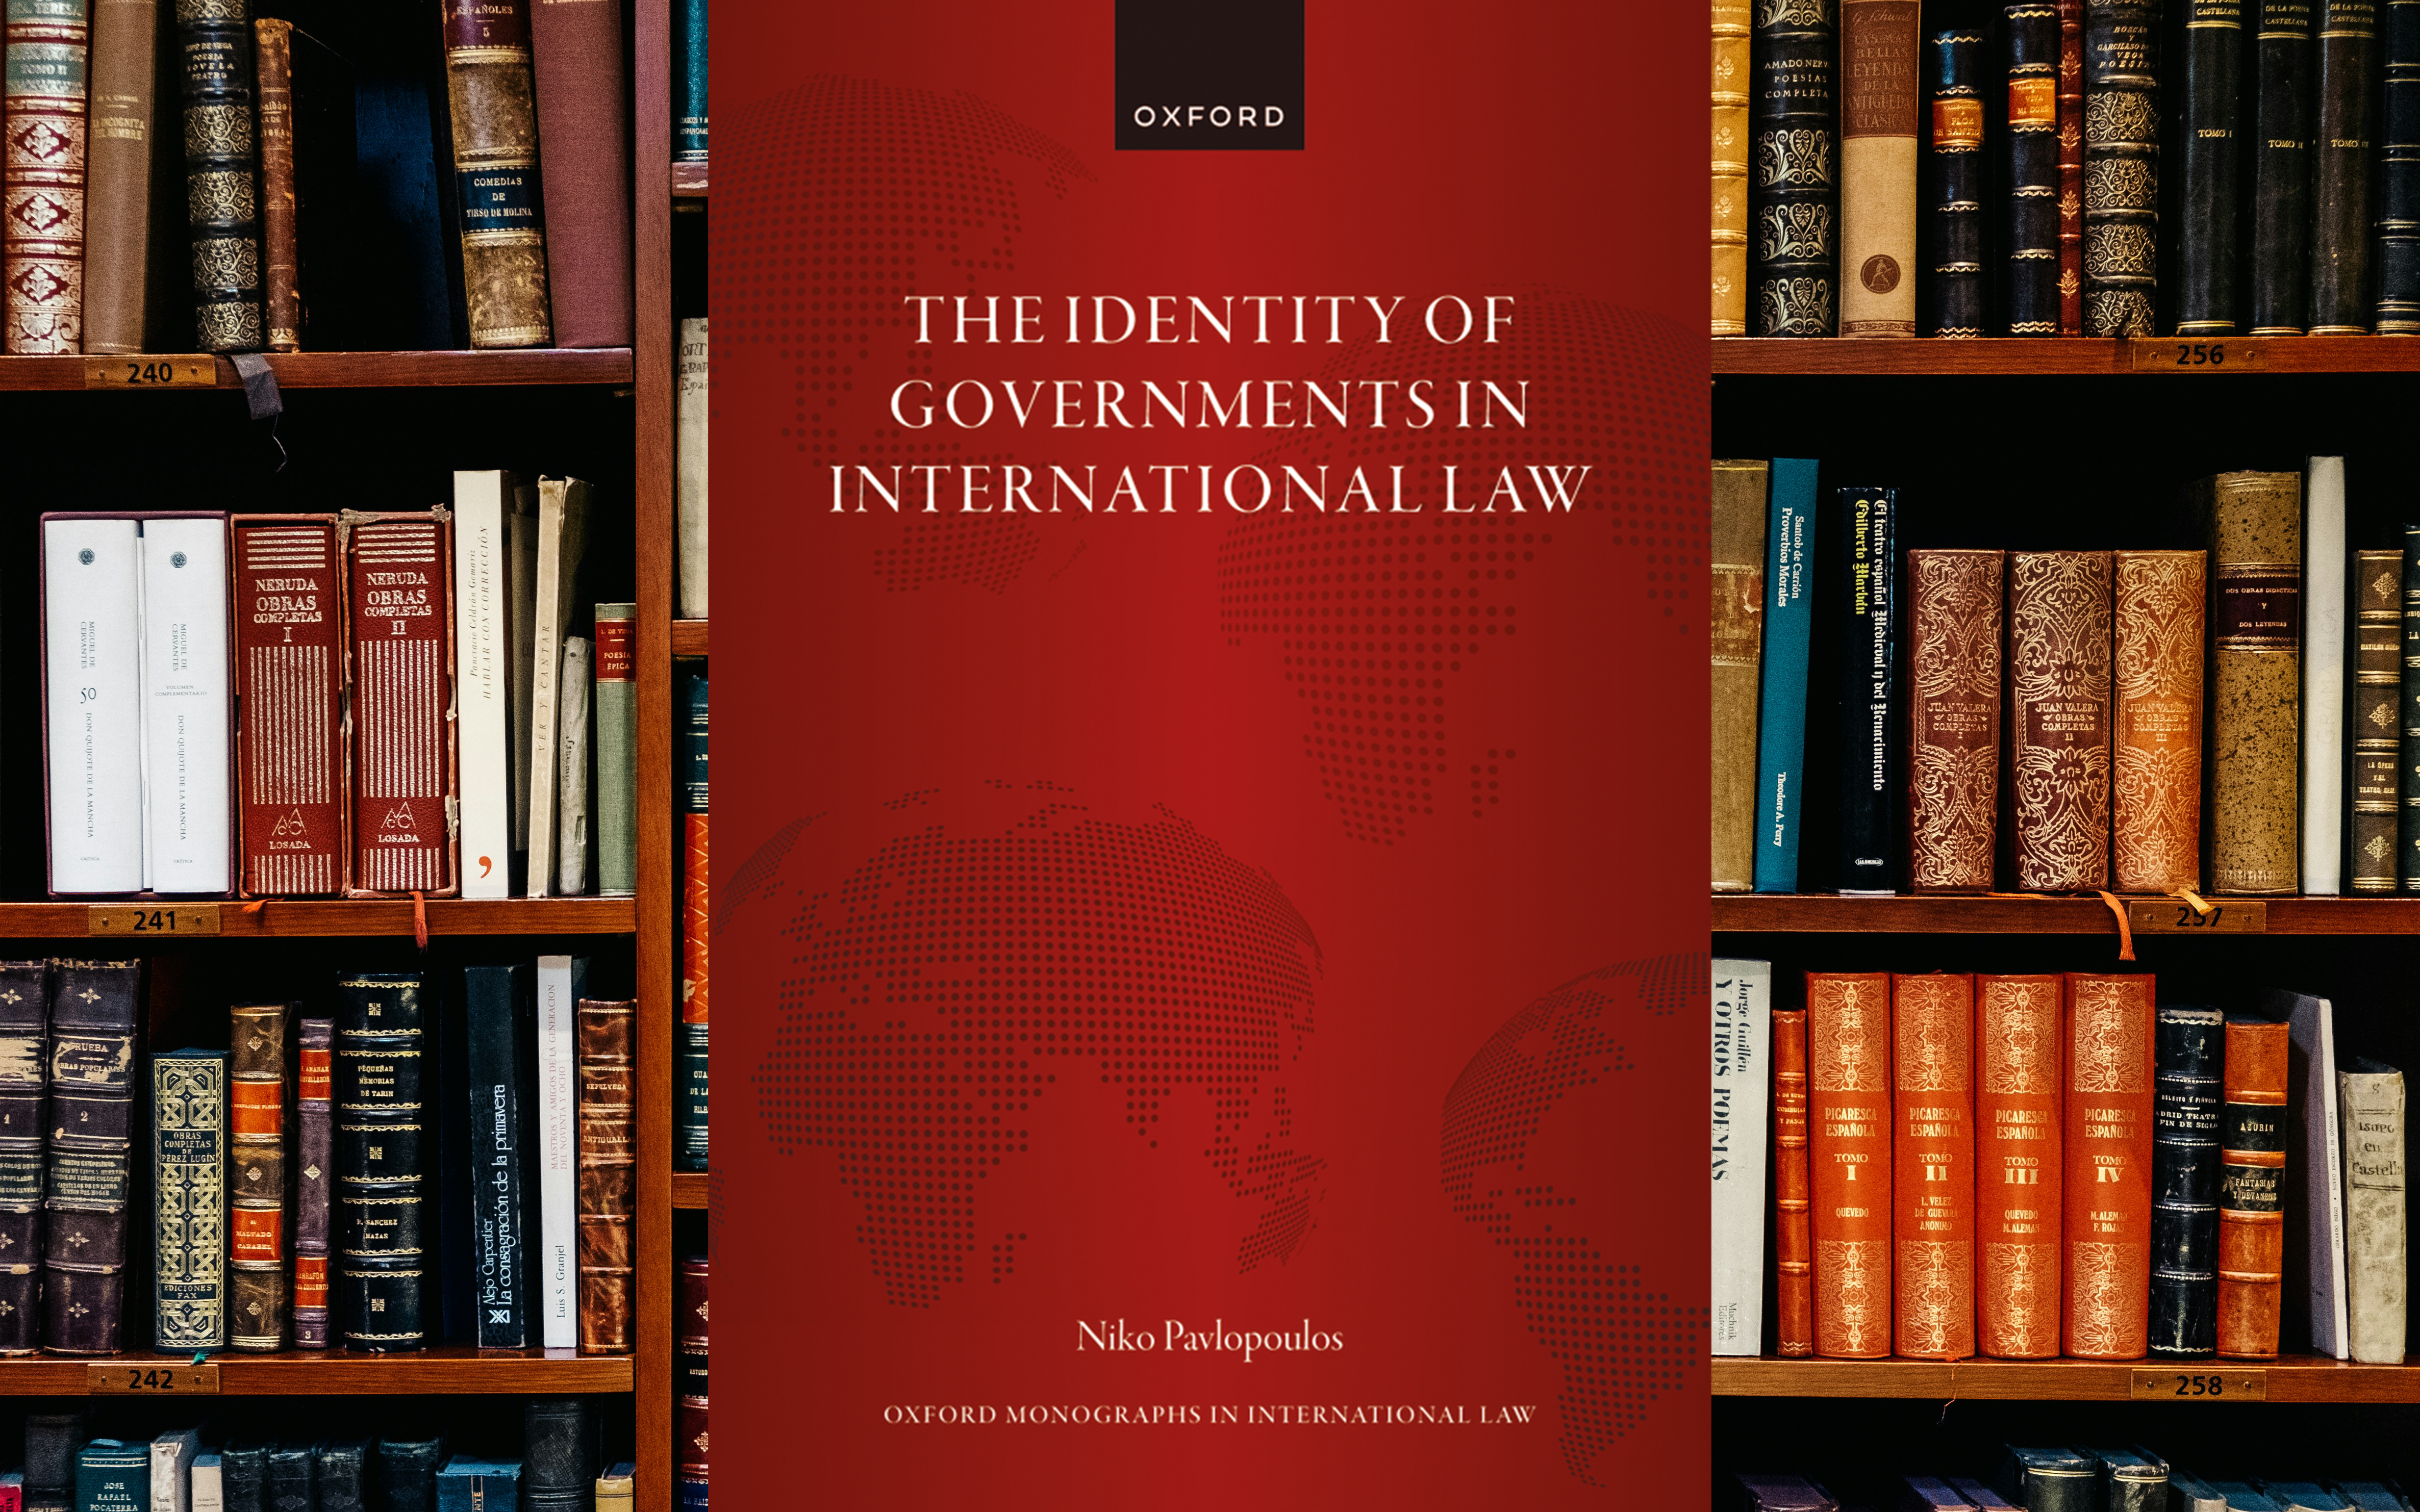 Image of book cover of The Identity of Governments in International Law